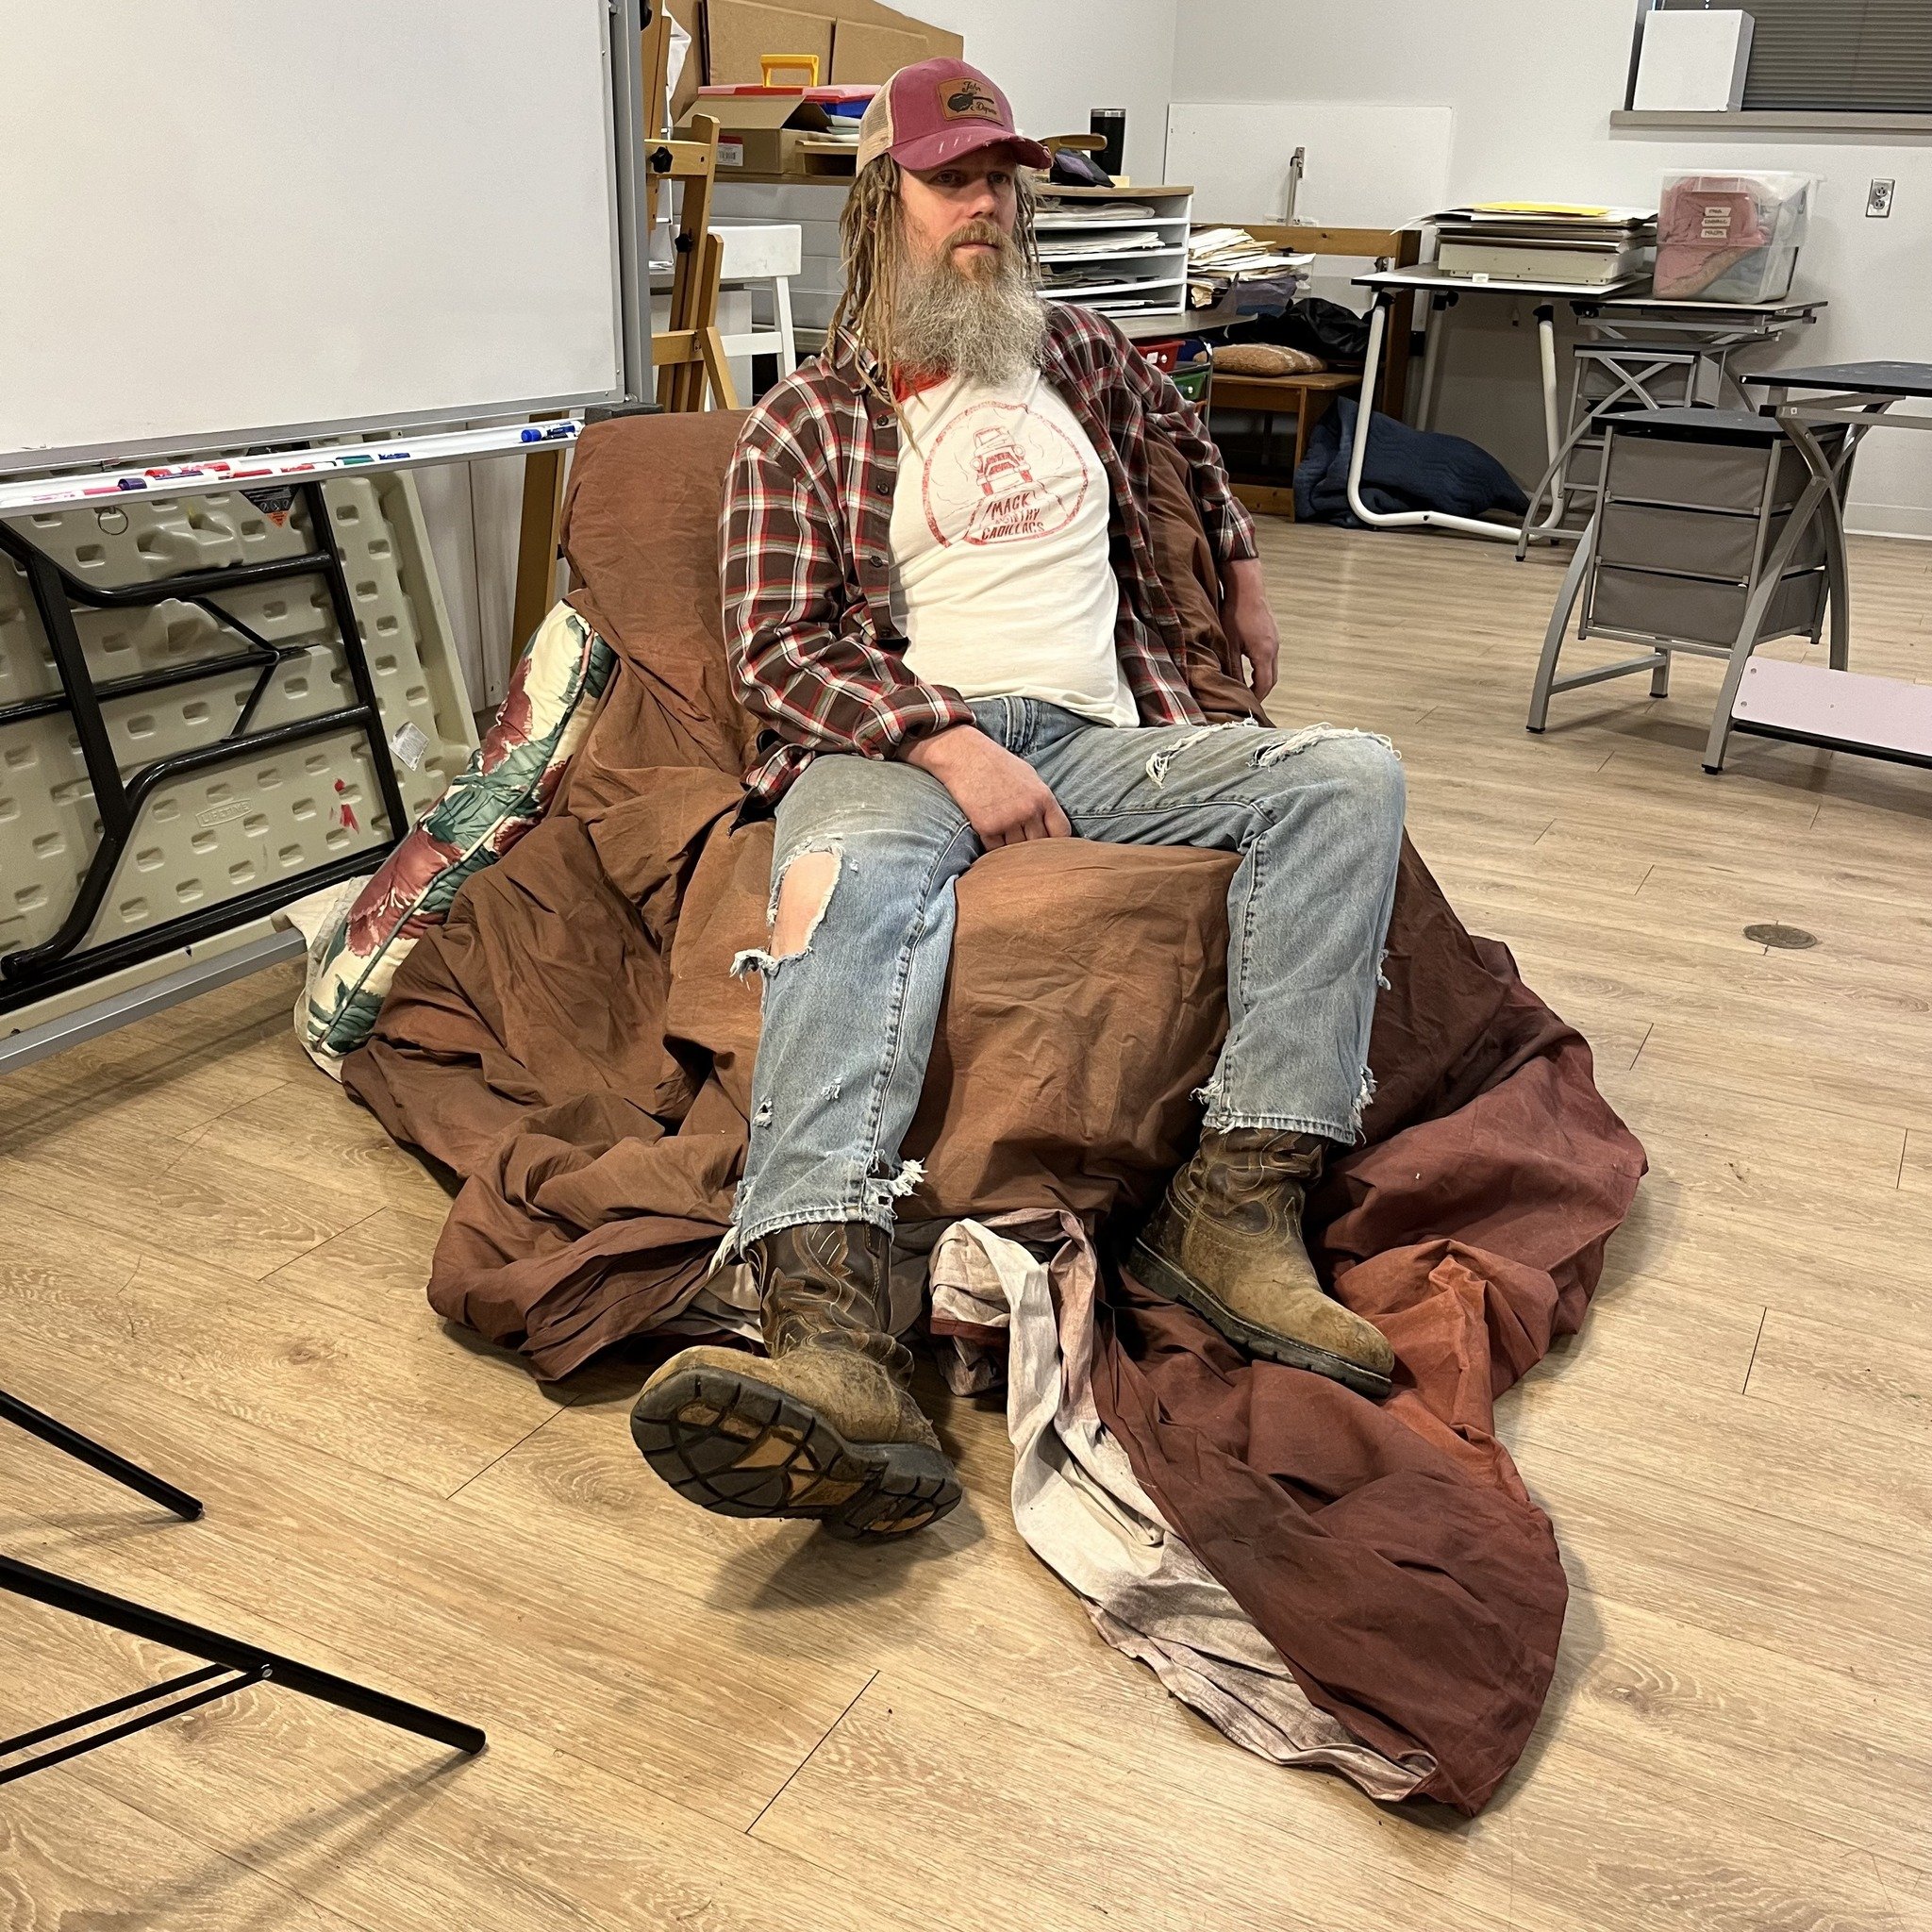 Big thanks to Joey for modeling for our artists today! Keep an eye on our social media pages for the resulting artwork tomorrow.
---
If you would like to participate in Friday Morning Art Sessions remotely, feel free to draw or paint this week's mode